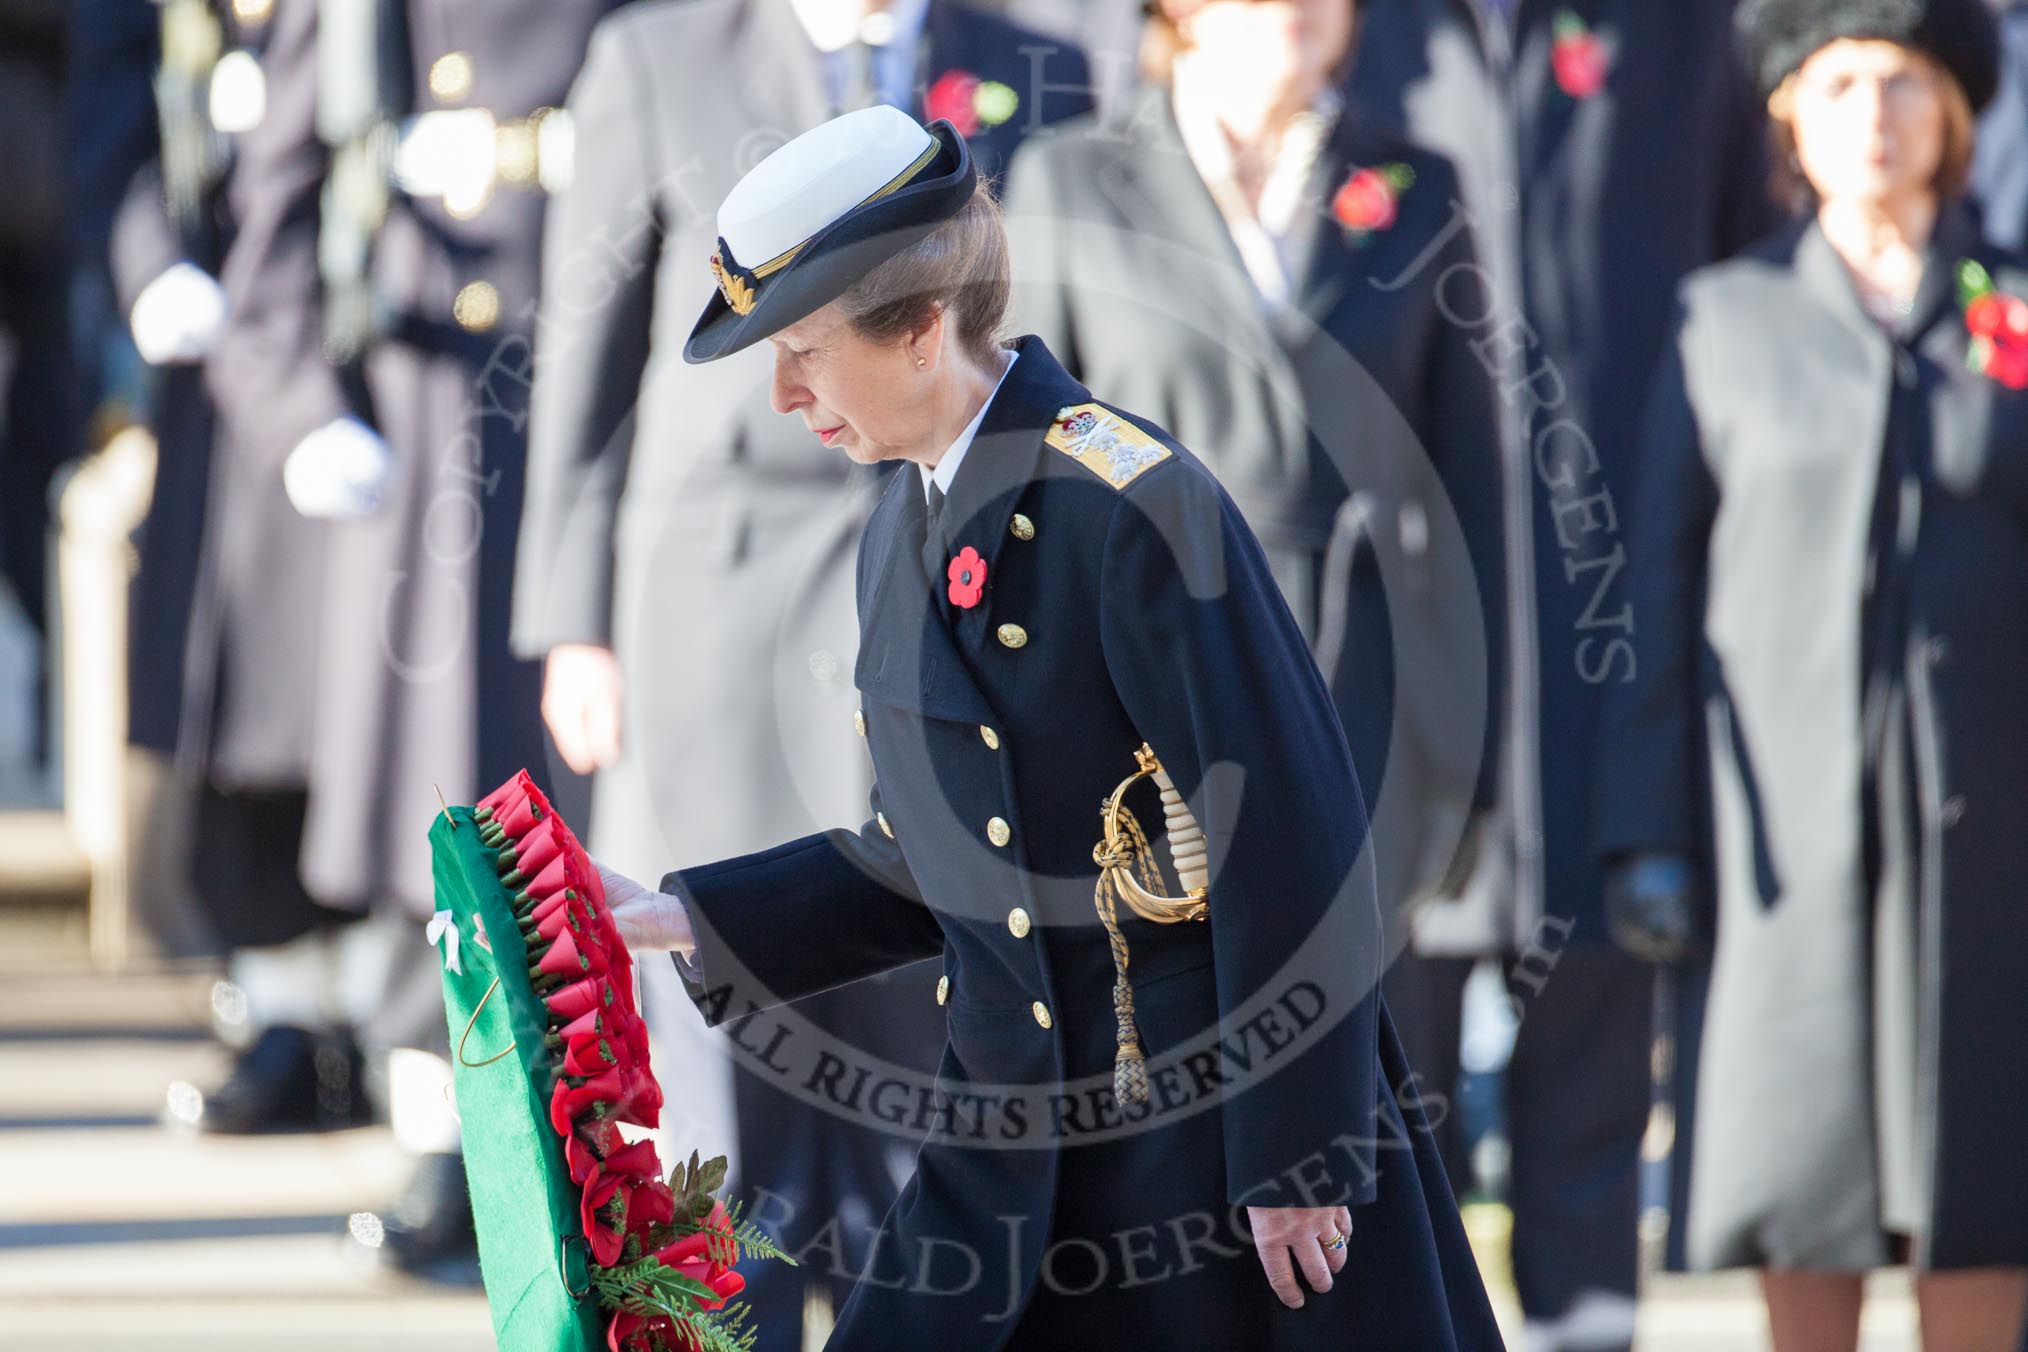 HRH The Princess Royal about to lay her wreath at the Cenotaph.